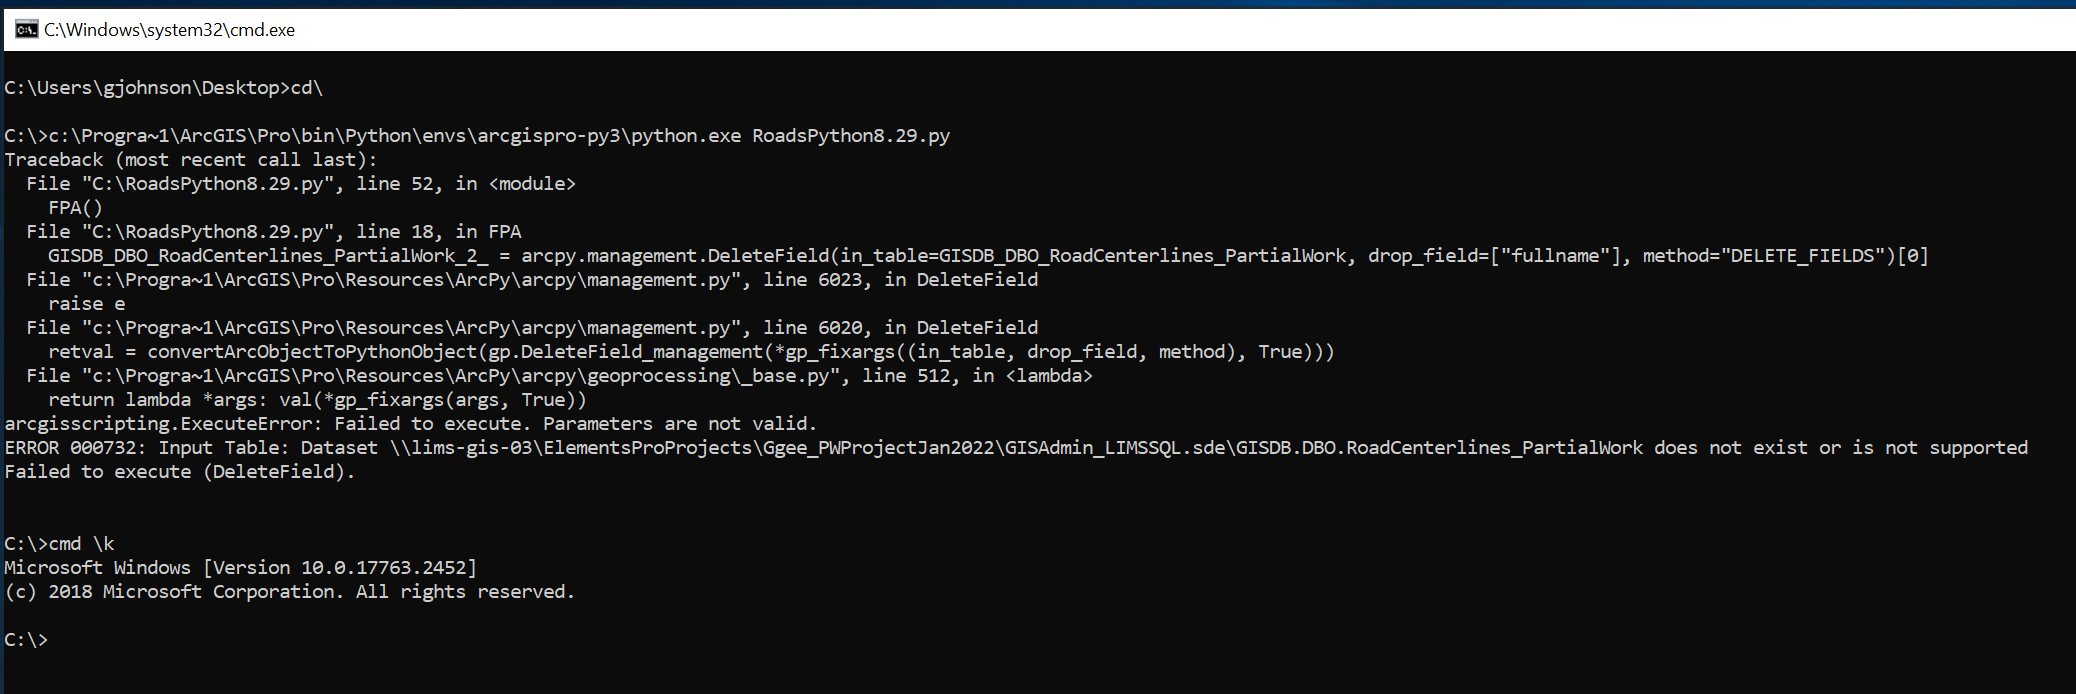 running PowerShell cmd with pipeline in cmd prompt - Stack Overflow